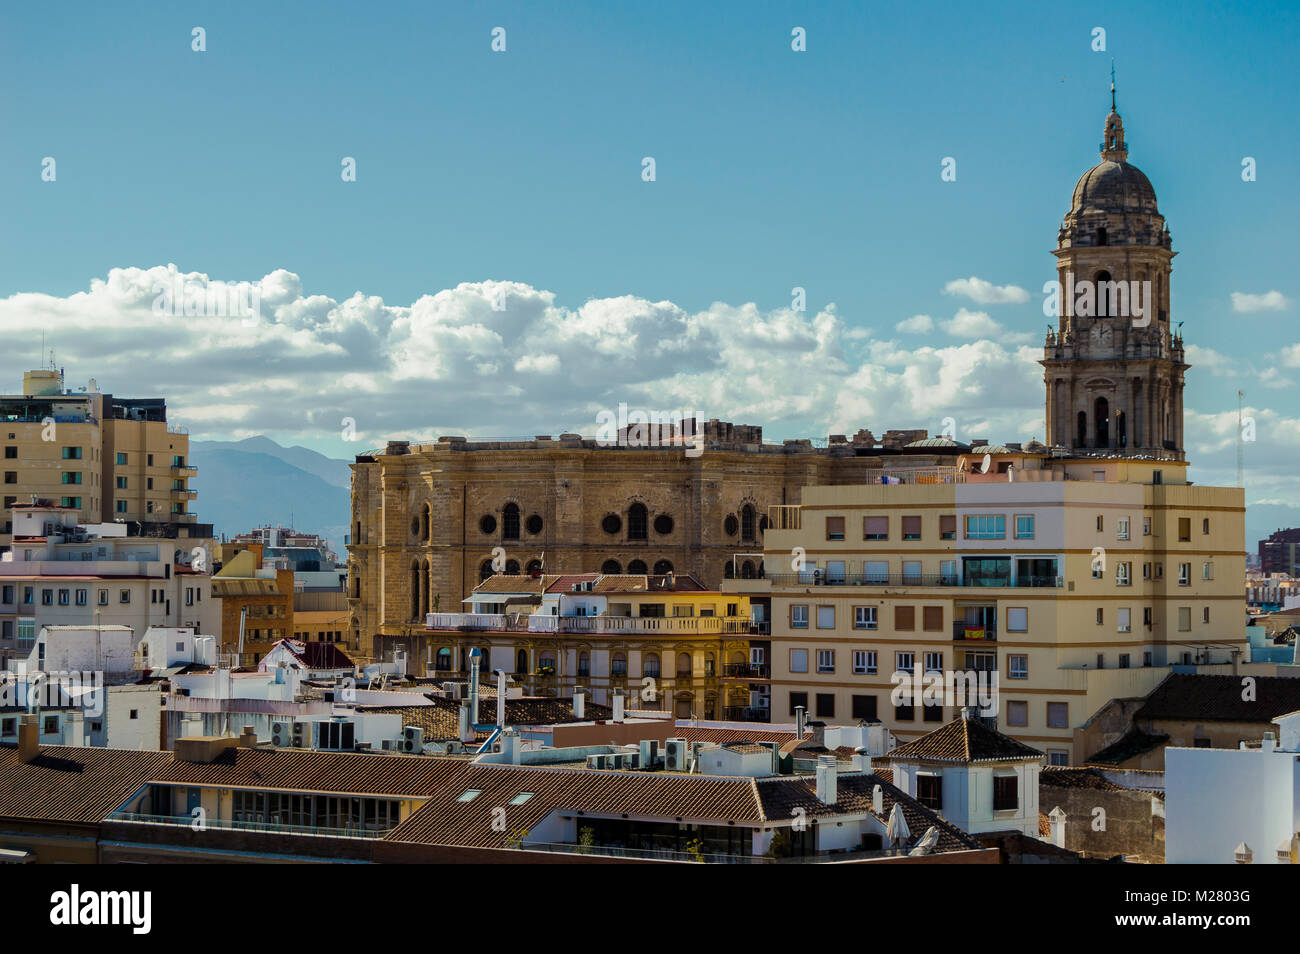 Panoramic views of the buildings and flats of the city center of Malaga, Andalusia, Spain. Beautiful urban landscape in a clear day. Stock Photo